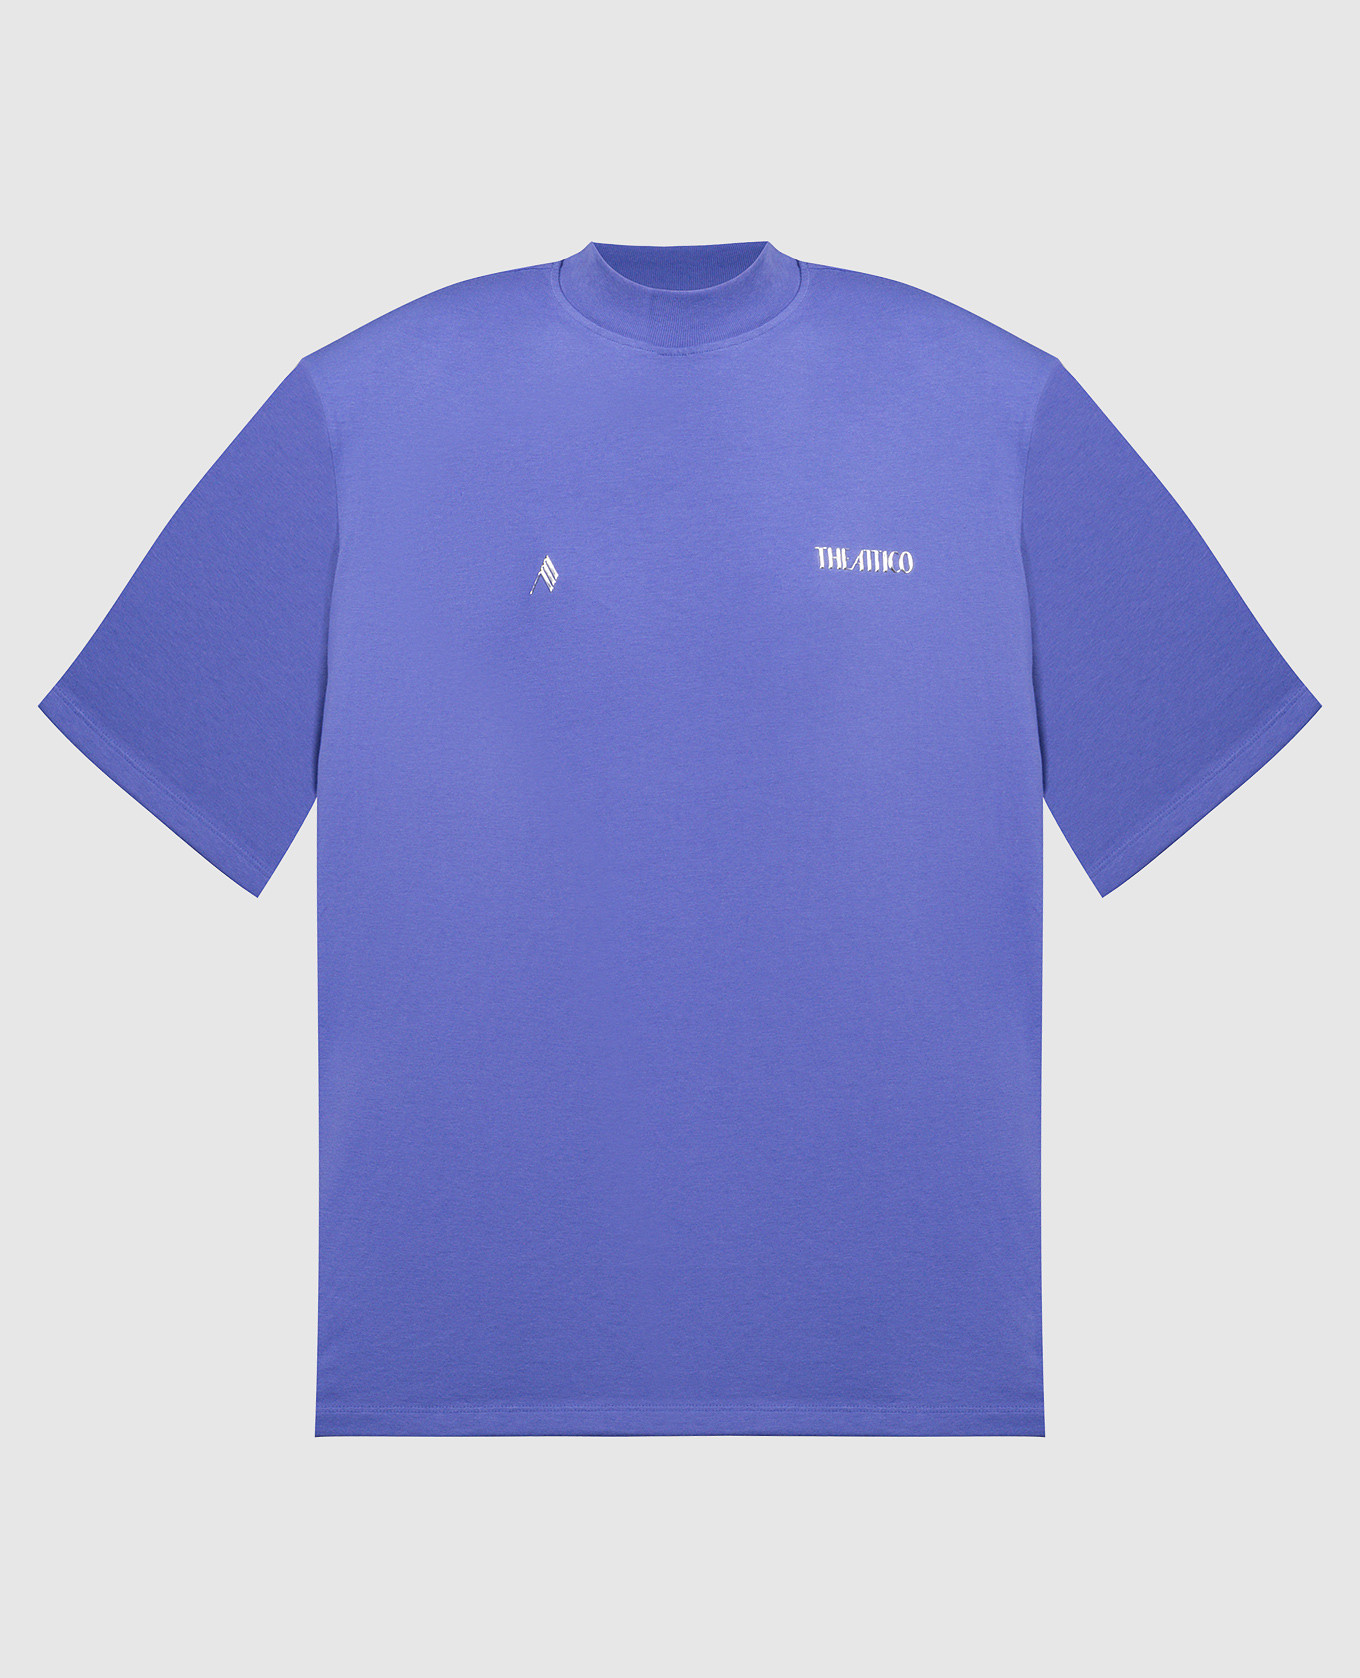 Purple t-shirt by Kylie with a textured logo